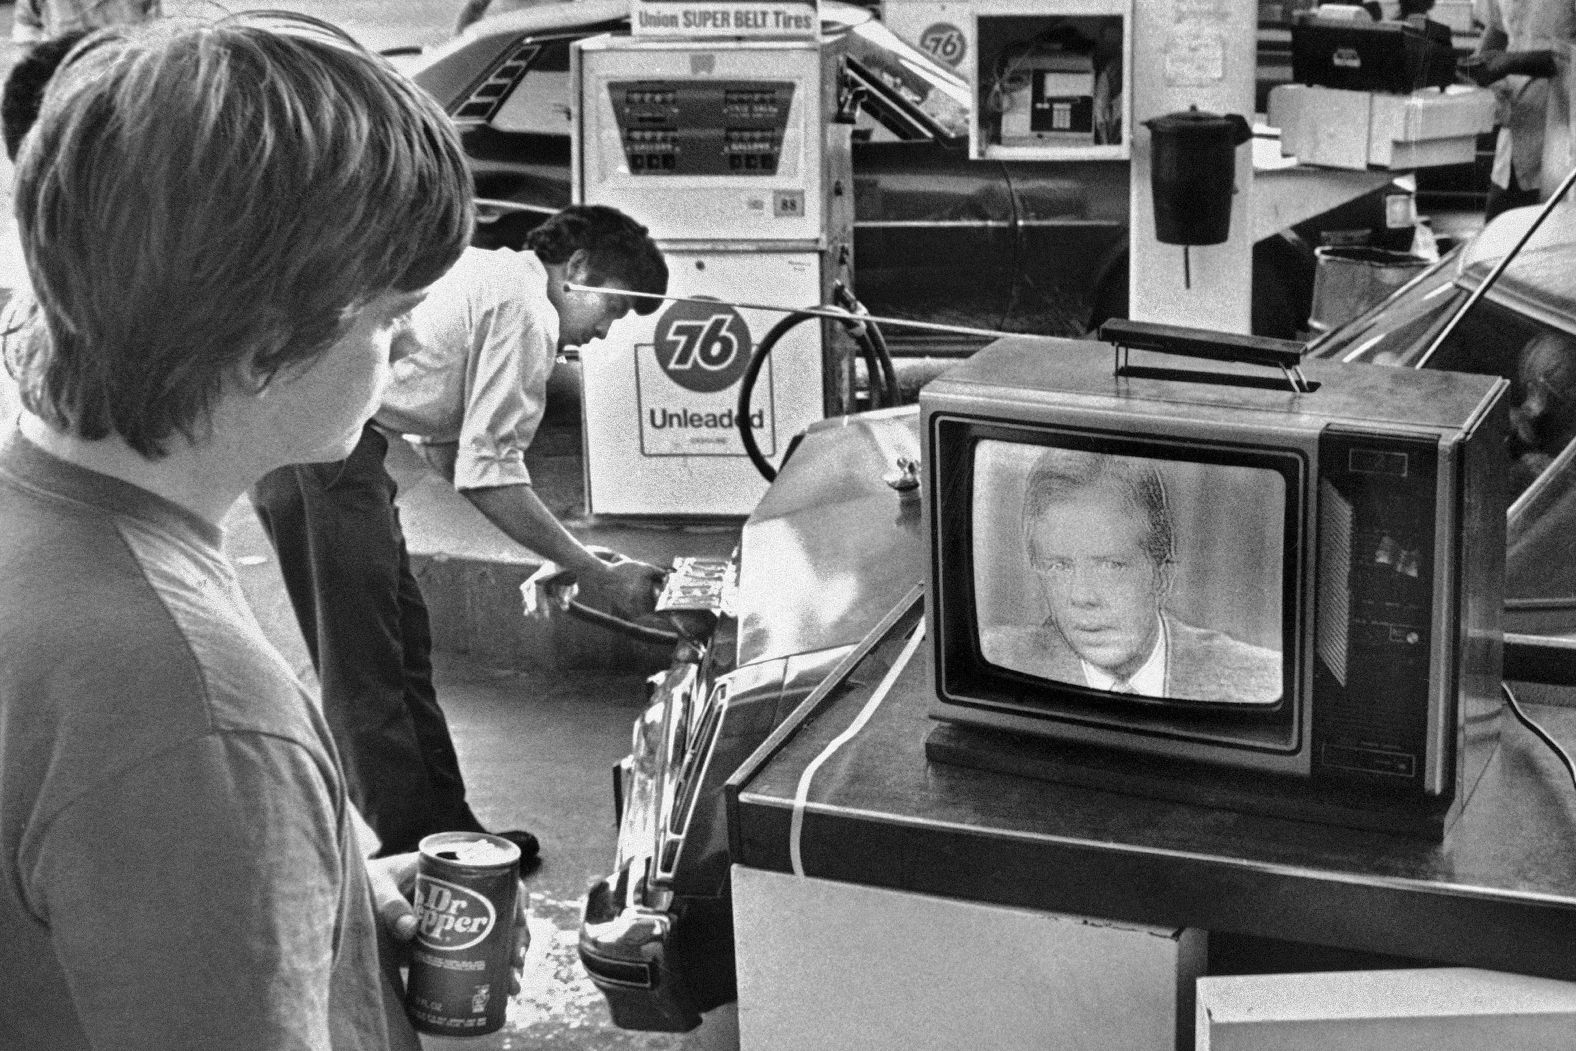 College student Chuck McManis watches Carter's nationally televised energy speech from a service station in Los Angeles in July 1979. In this speech, Carter described what he saw as a growing "crisis of confidence" in the country. An Arab oil embargo led to fuel shortages and sky-high prices throughout much of the 1970s. At times, Americans were waiting in line for hours to fill their gas tanks.